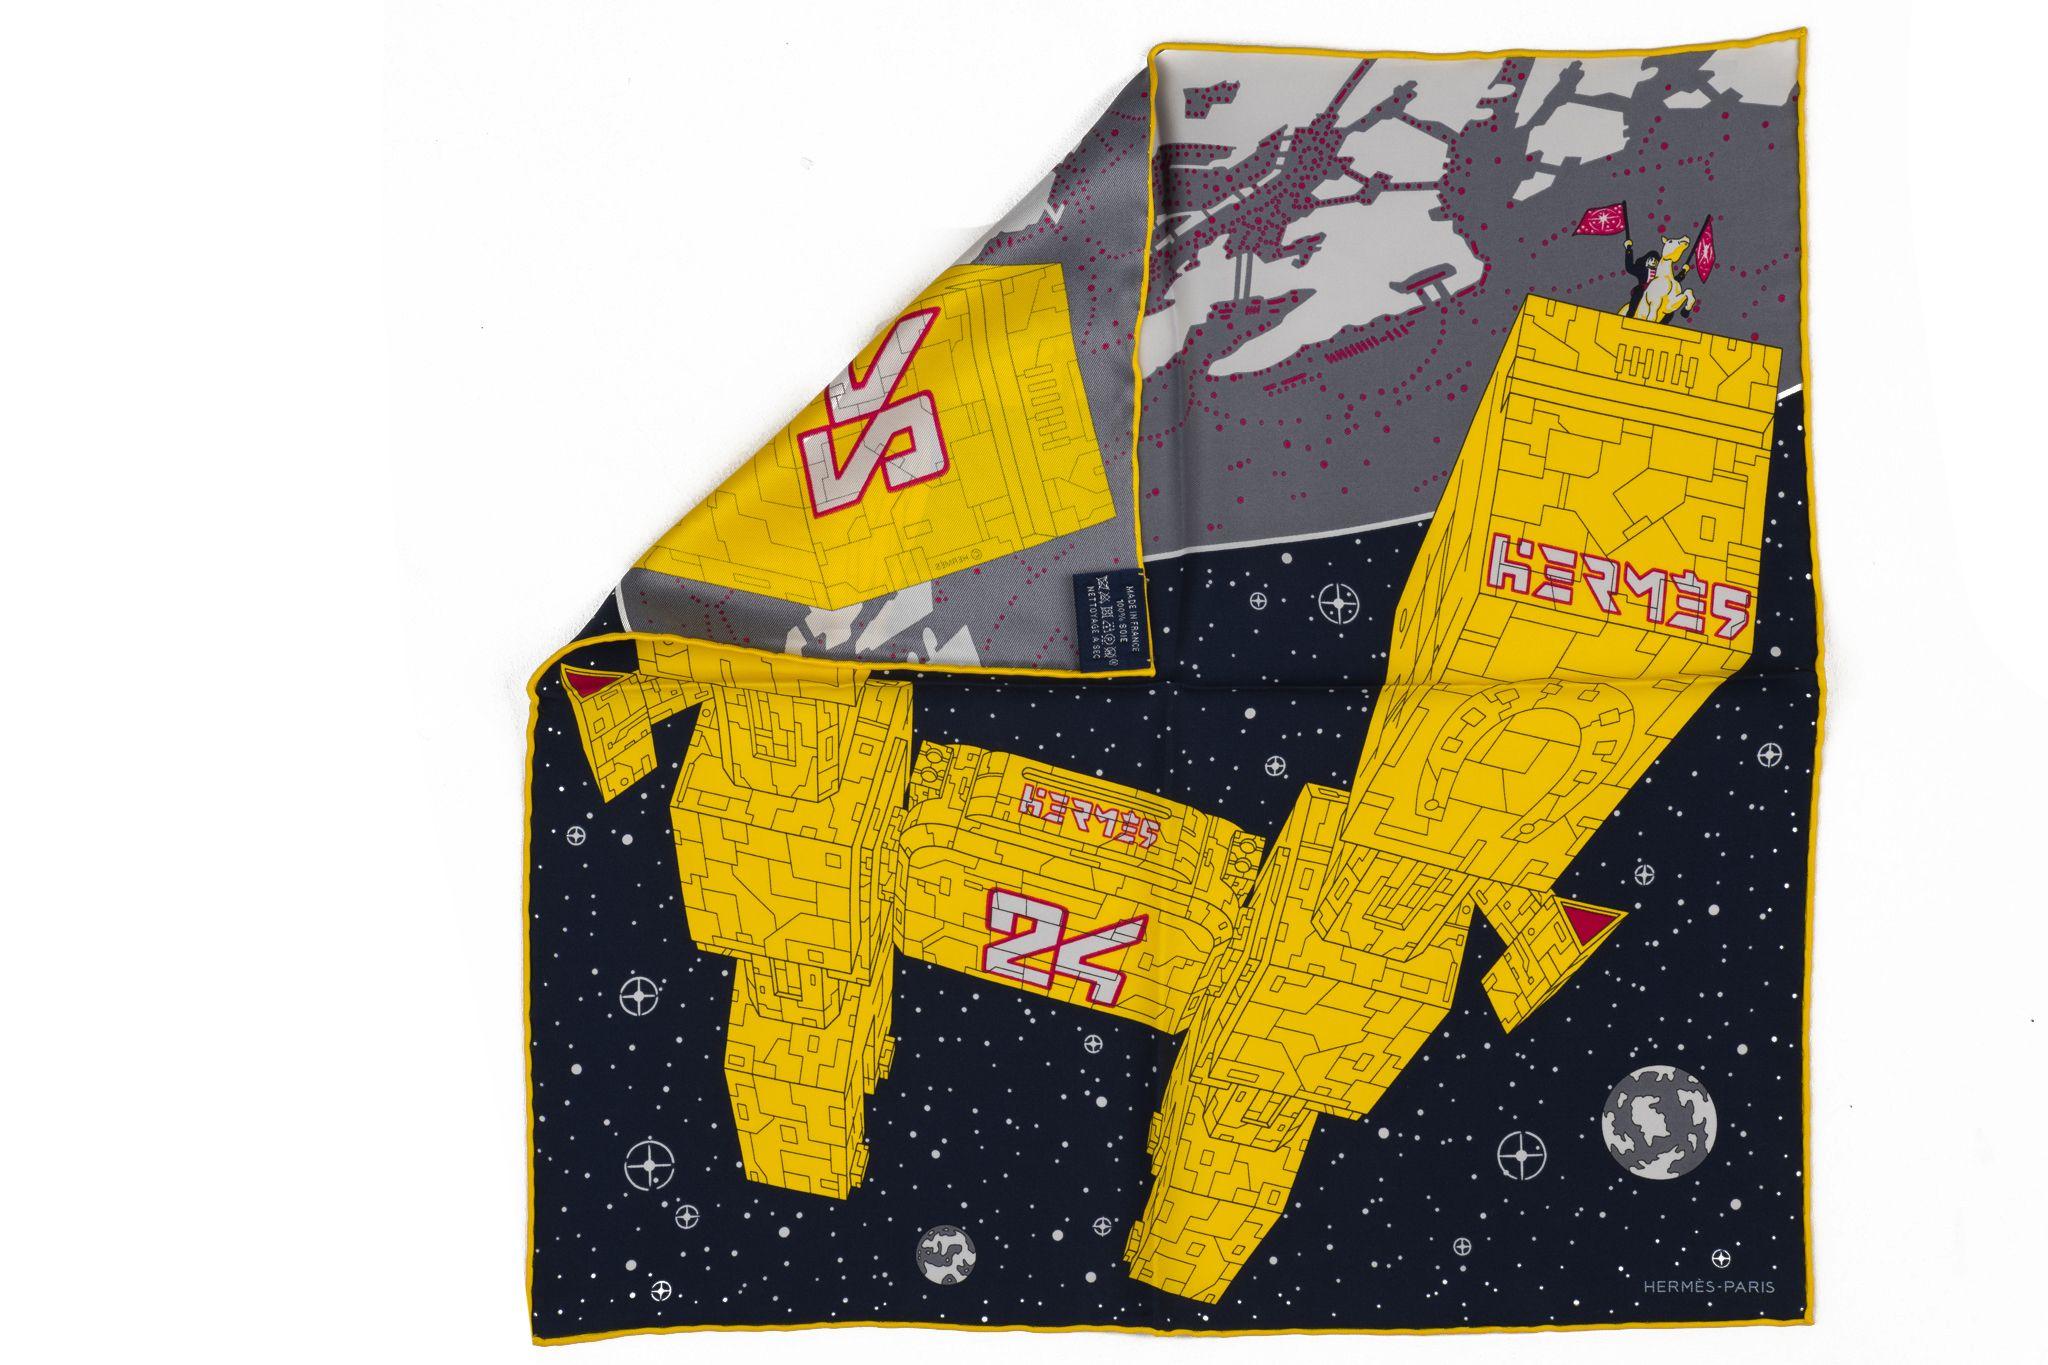 Hermès new collectible silk gavroche, spaceship design in yellow and grey. Hand rolled trim. Comes with original box.